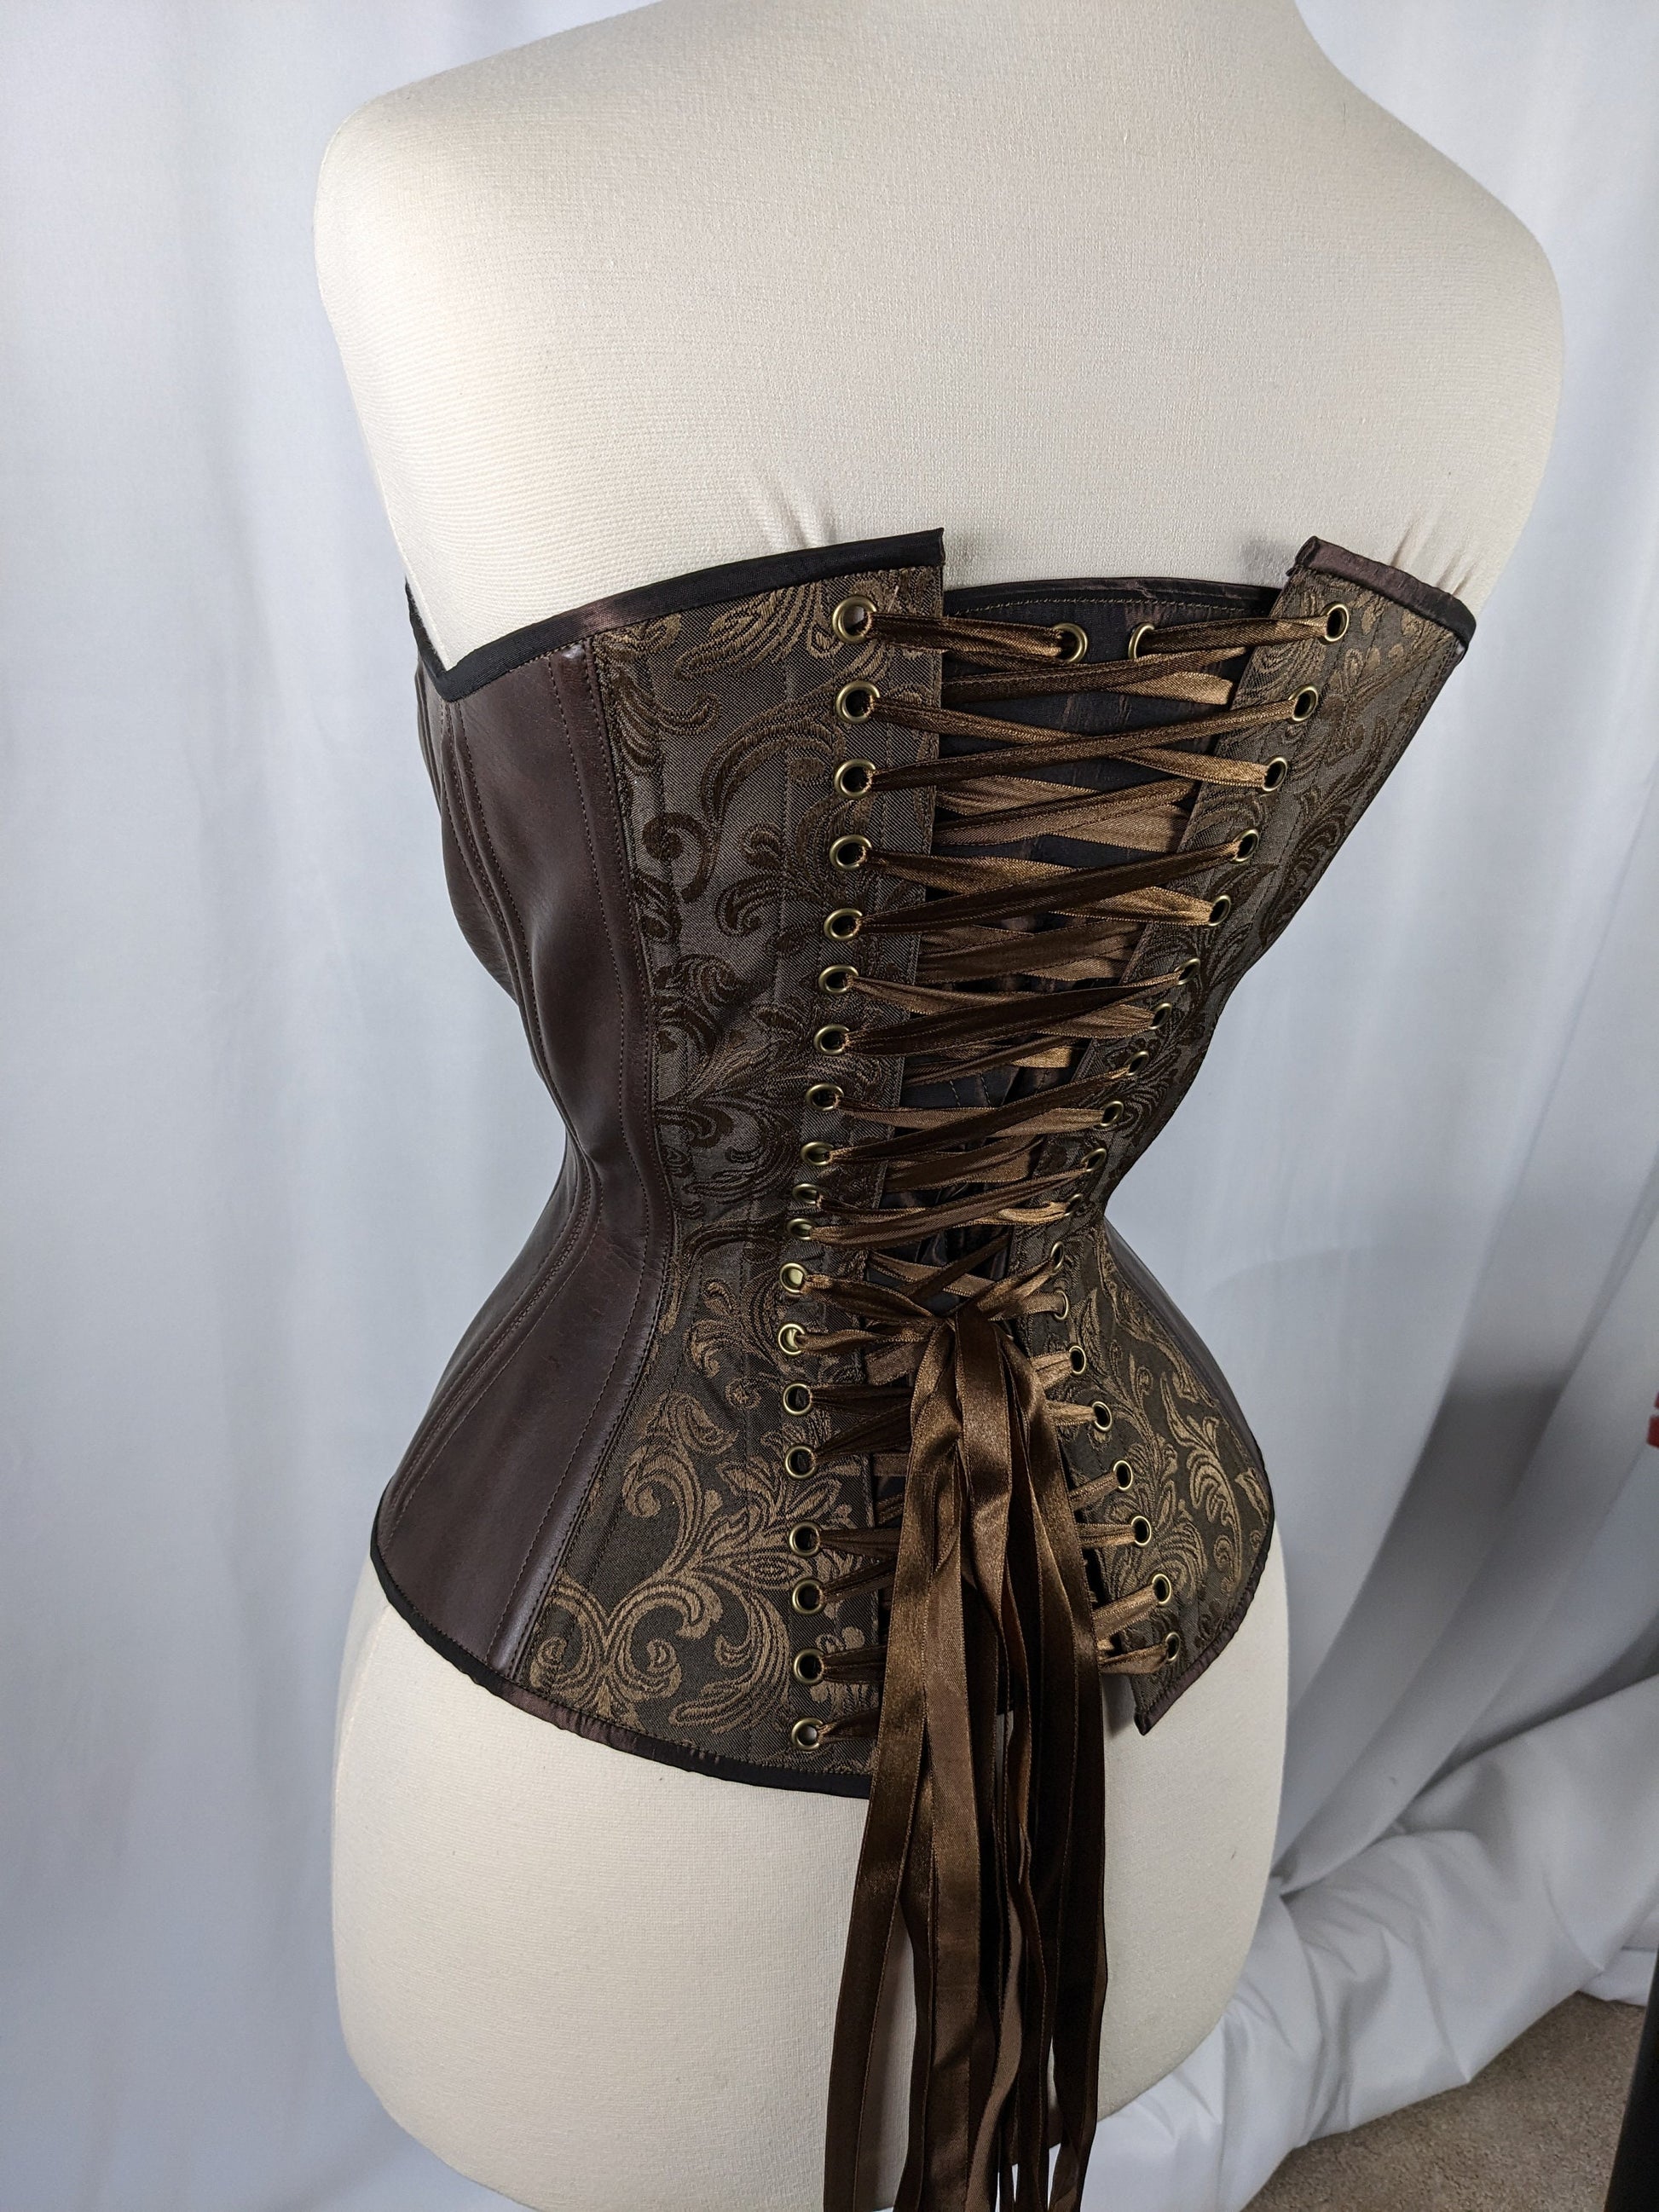 Shop our Bespoke Corset & Steampunk Corset from the store at low price